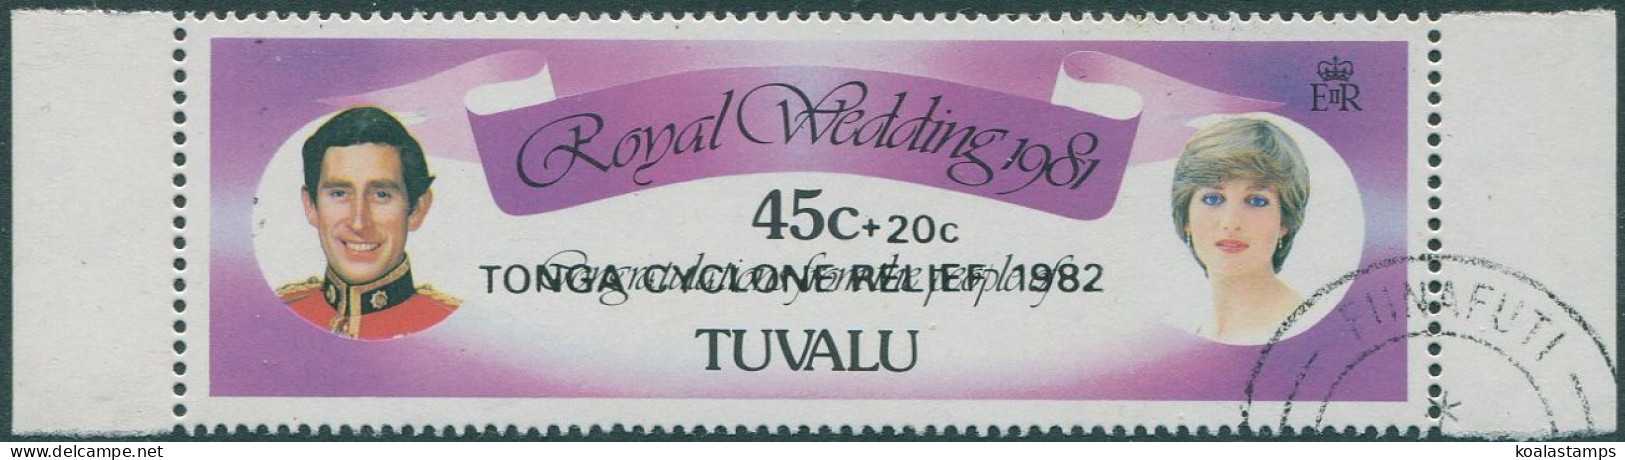 Tuvalu 1982 SG188 45c Charles And Diana Cyclone Relief Surcharge FU - Tuvalu (fr. Elliceinseln)